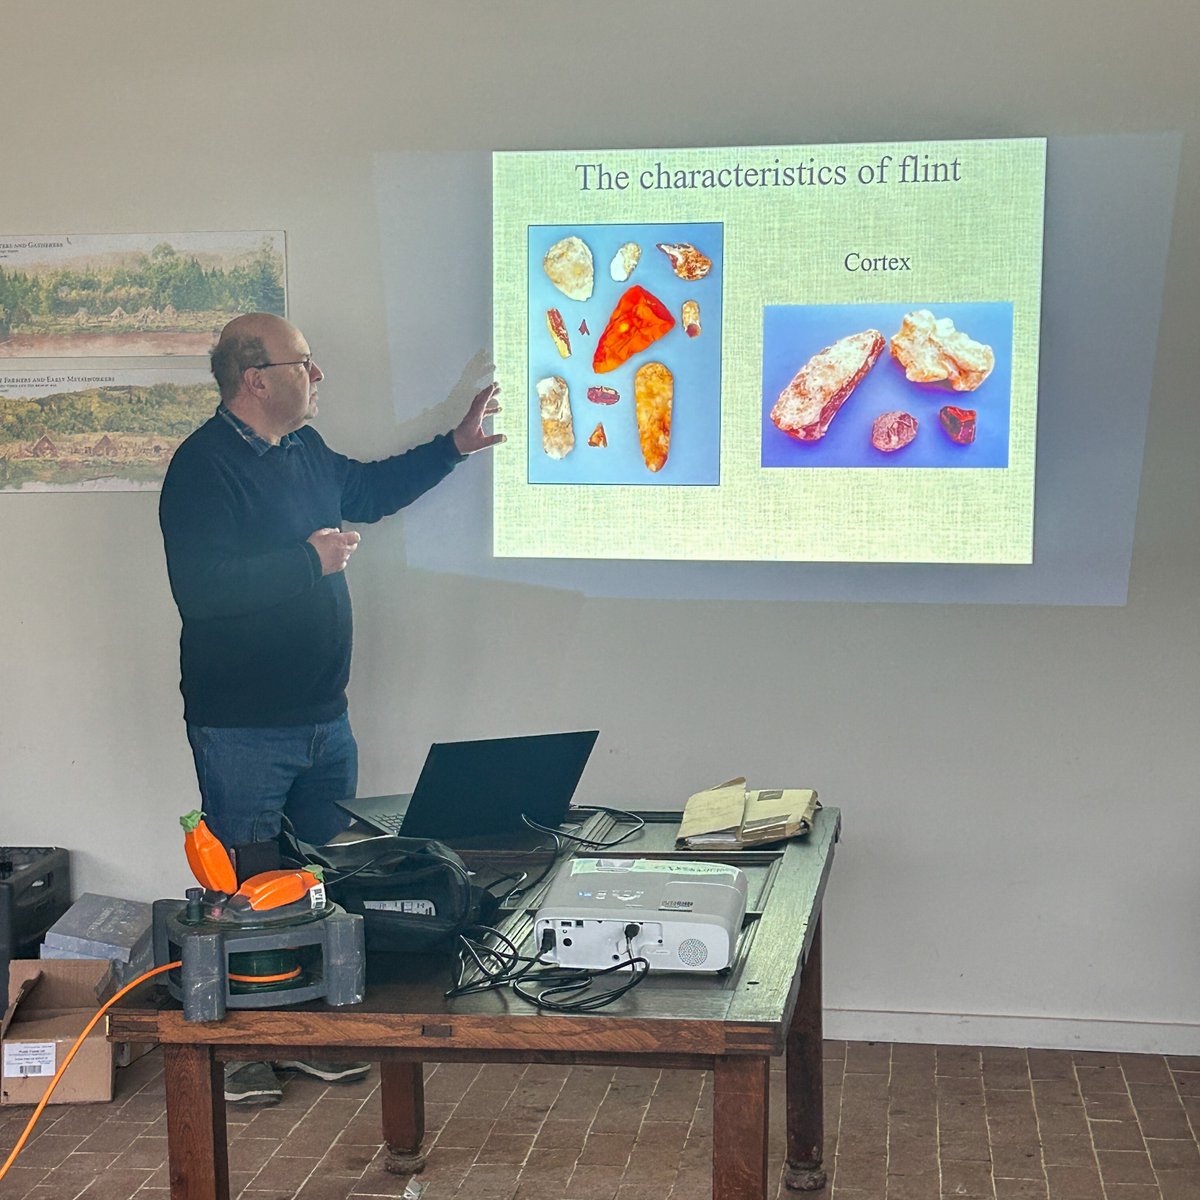 Brilliant workshop with Chris Butler, one of the country’s leading experts on prehistoric flintwork. Volunteer with #changingchalk. Become a #monumentmentor or a #downsfromabovedetective. More archaeological adventures coming up in the summer 🪓⛏ 👇 bit.ly/3RMNDJ9